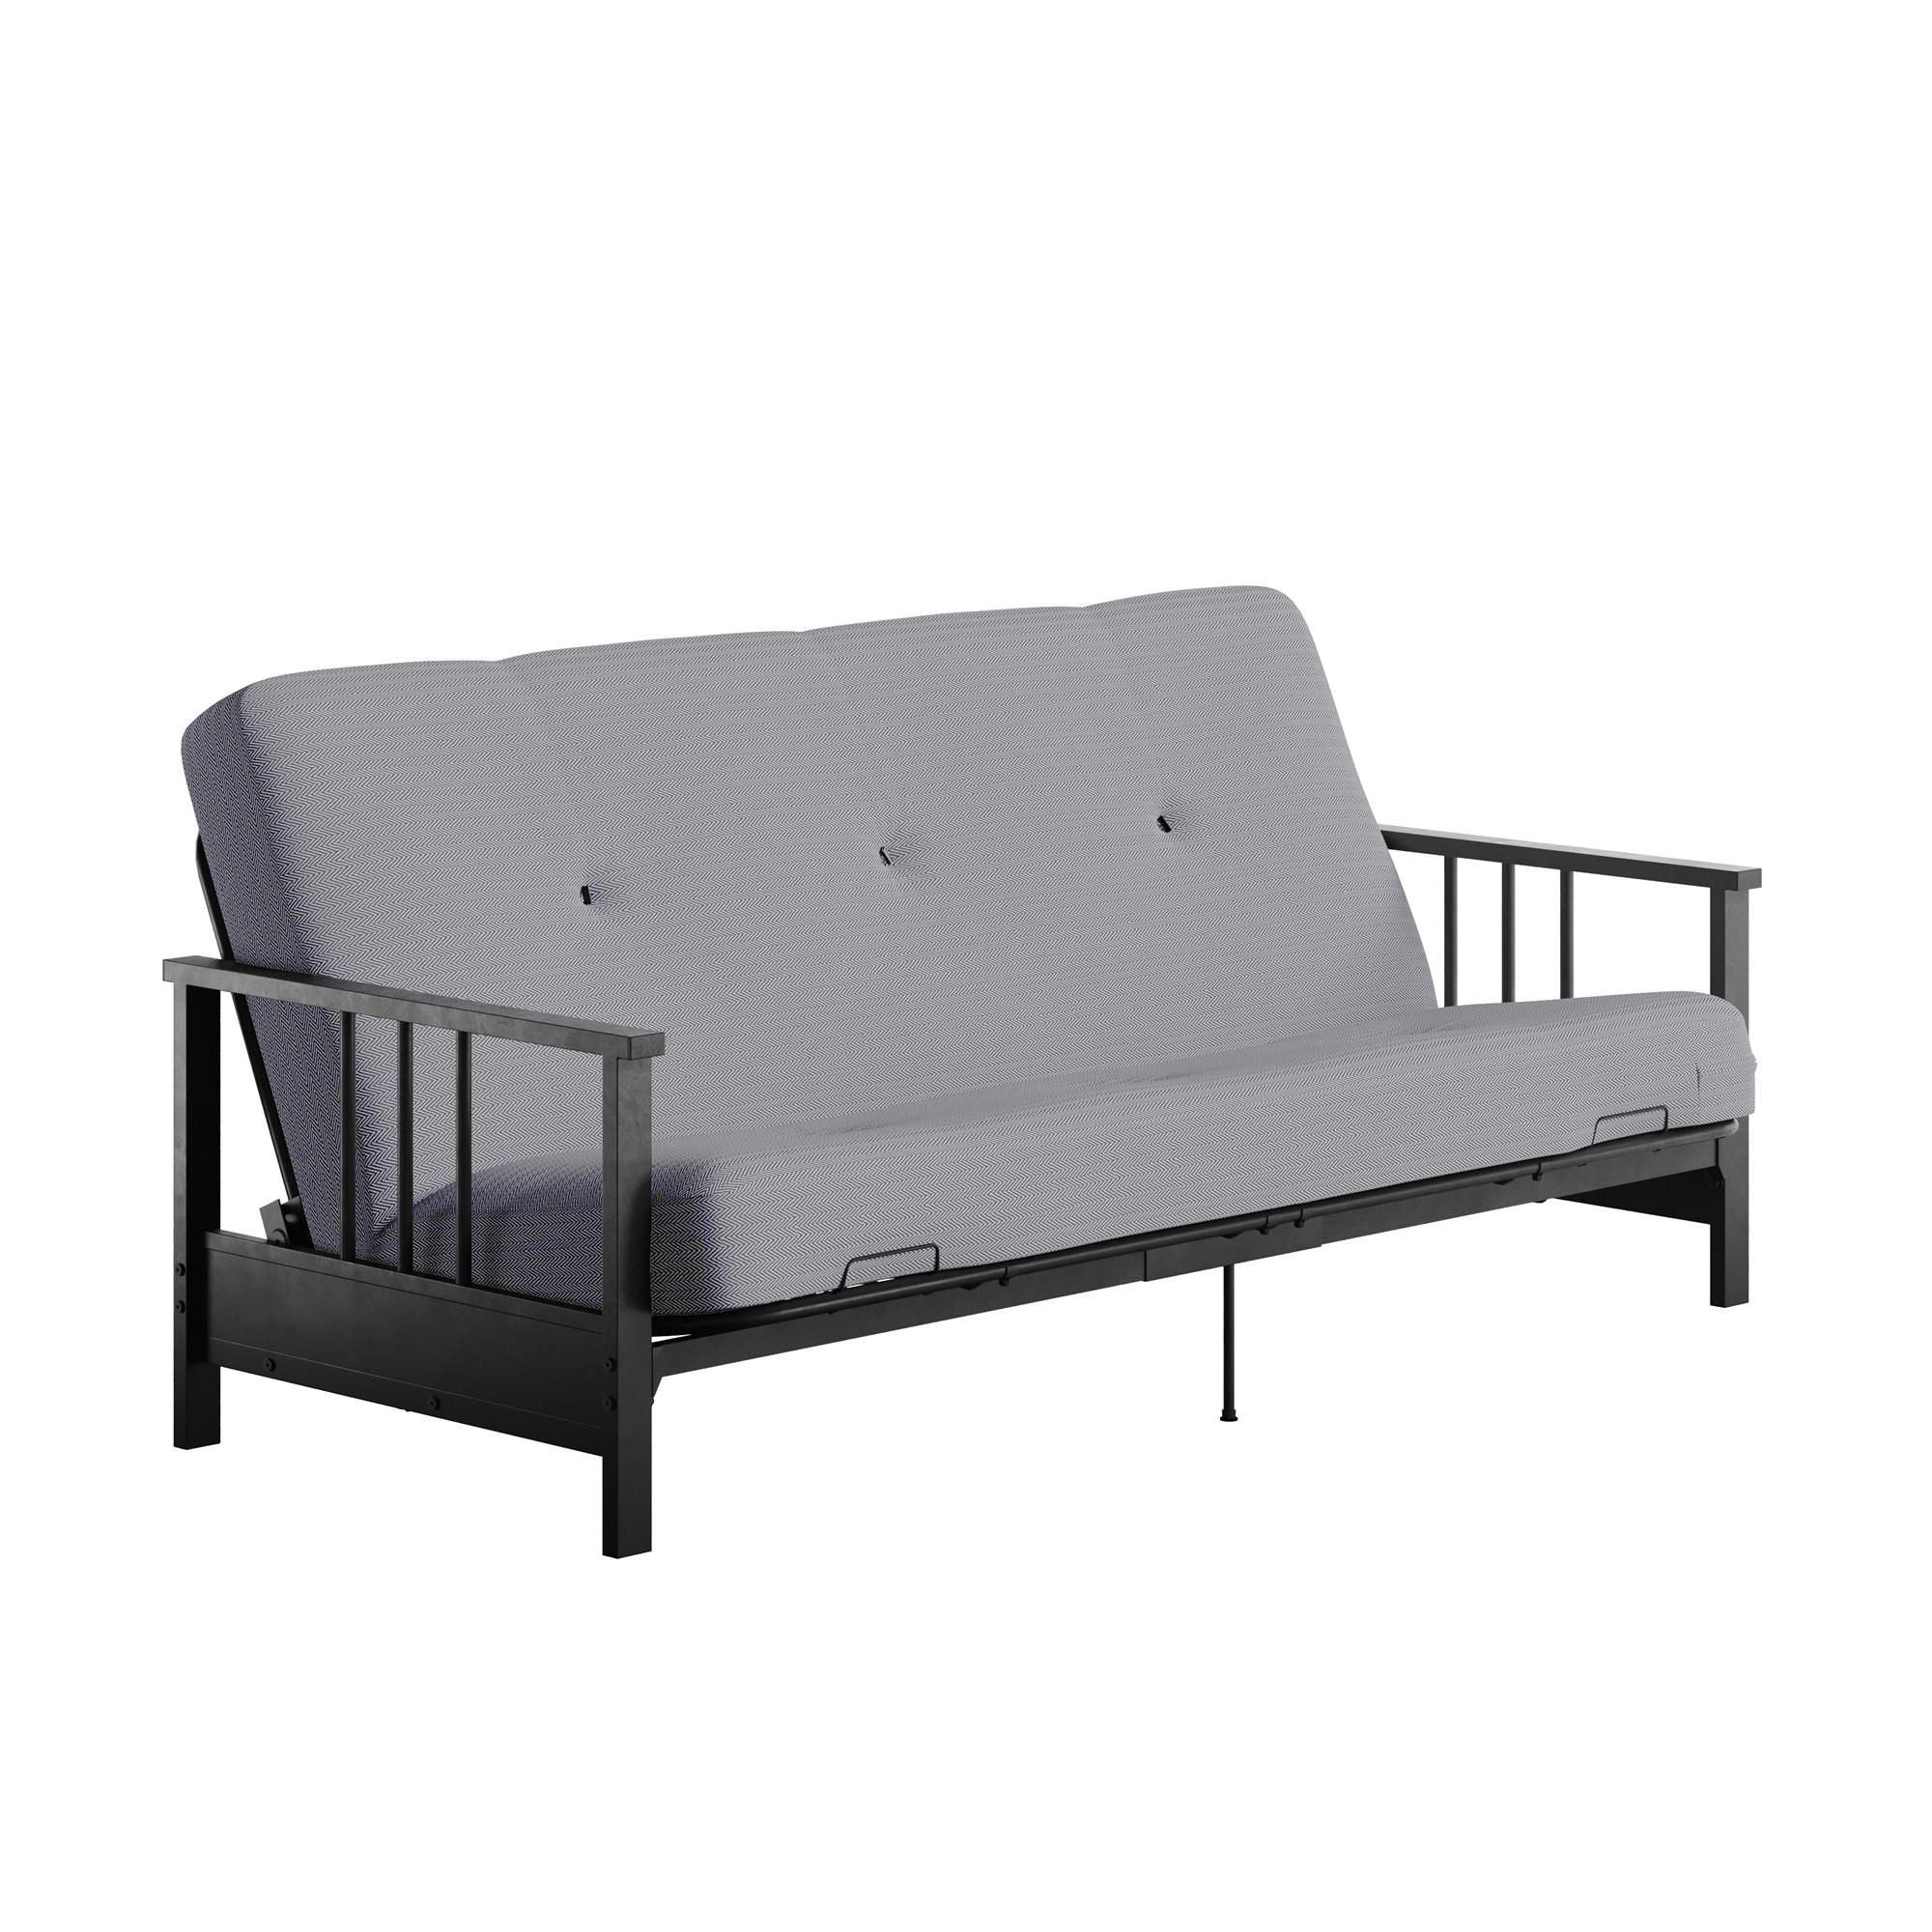 DHP Harlow Full Metal Arm Futon with 6-Inch Thermobonded High Density Polyester Fill Herringbone Mattress - image 4 of 19